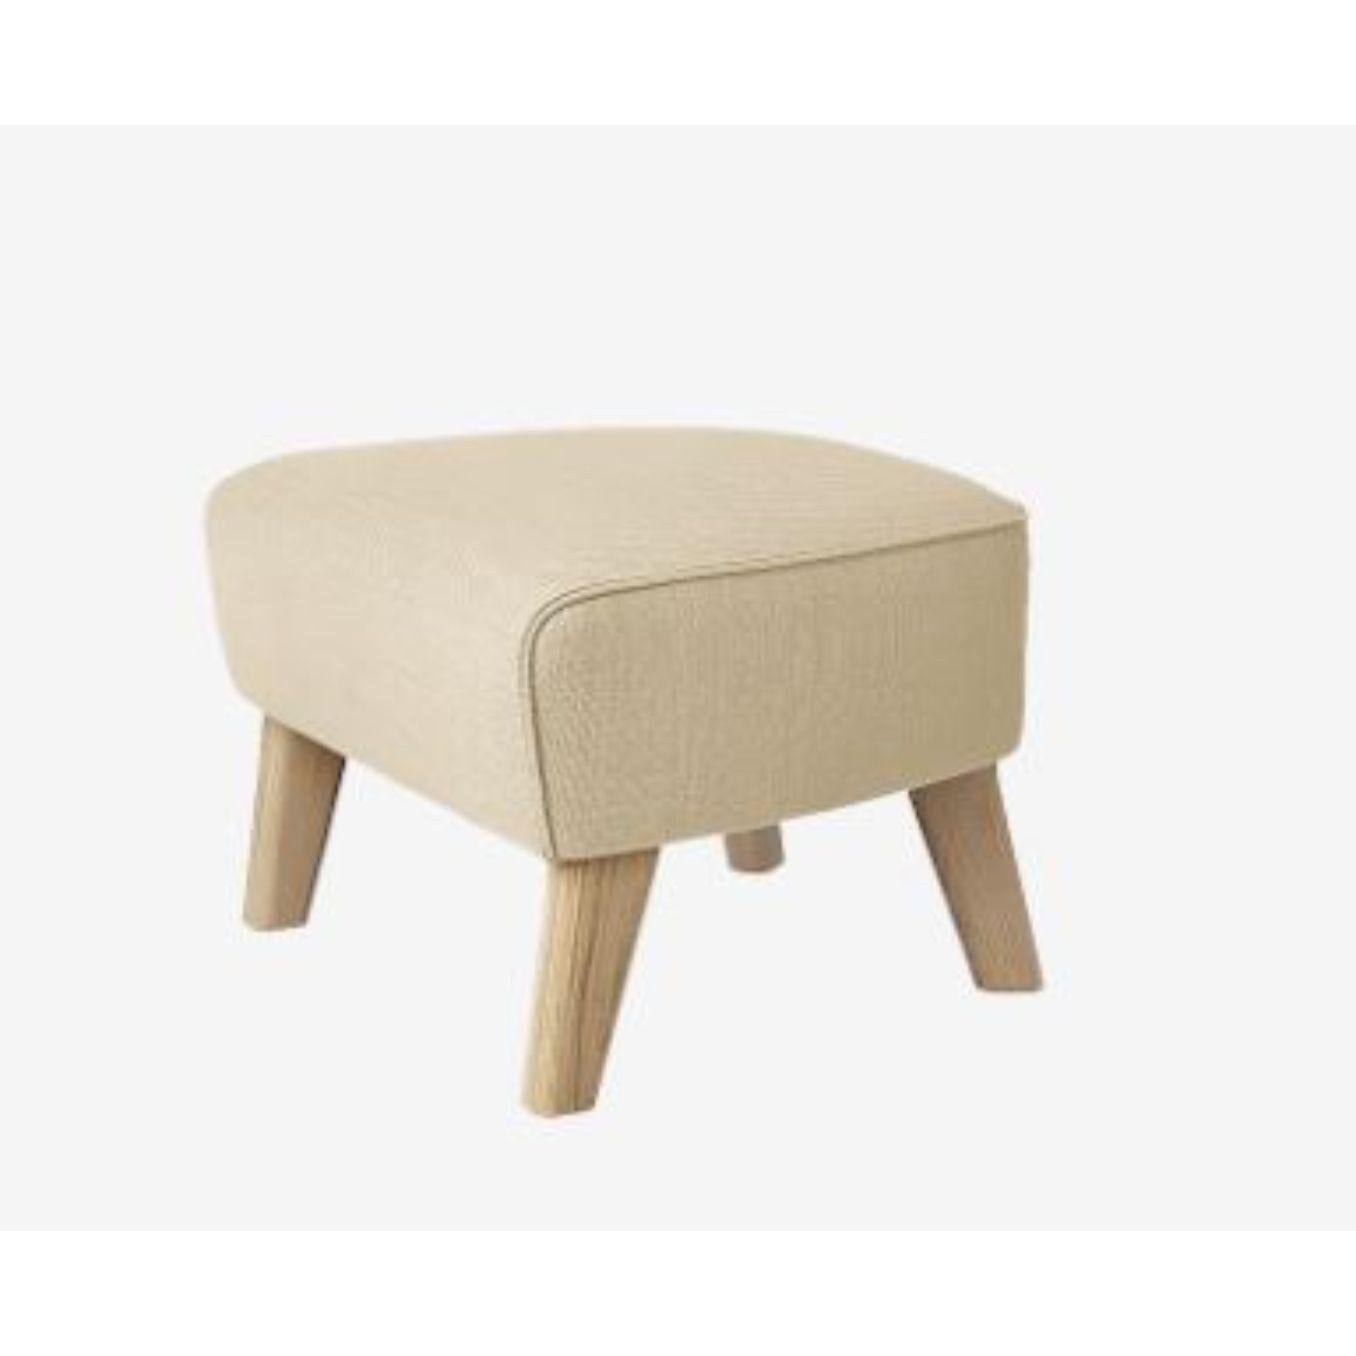 Sahco Zero 1 My Own chair footsool by Lassen
Dimensions: D 58 x W 56 x H 40 cm 
Materials: Textile, Natural Oak, 
Also available in different colors and materials. 
Weight: 18 Kg

The My Own Chair Footstool has been designed in the same spirit